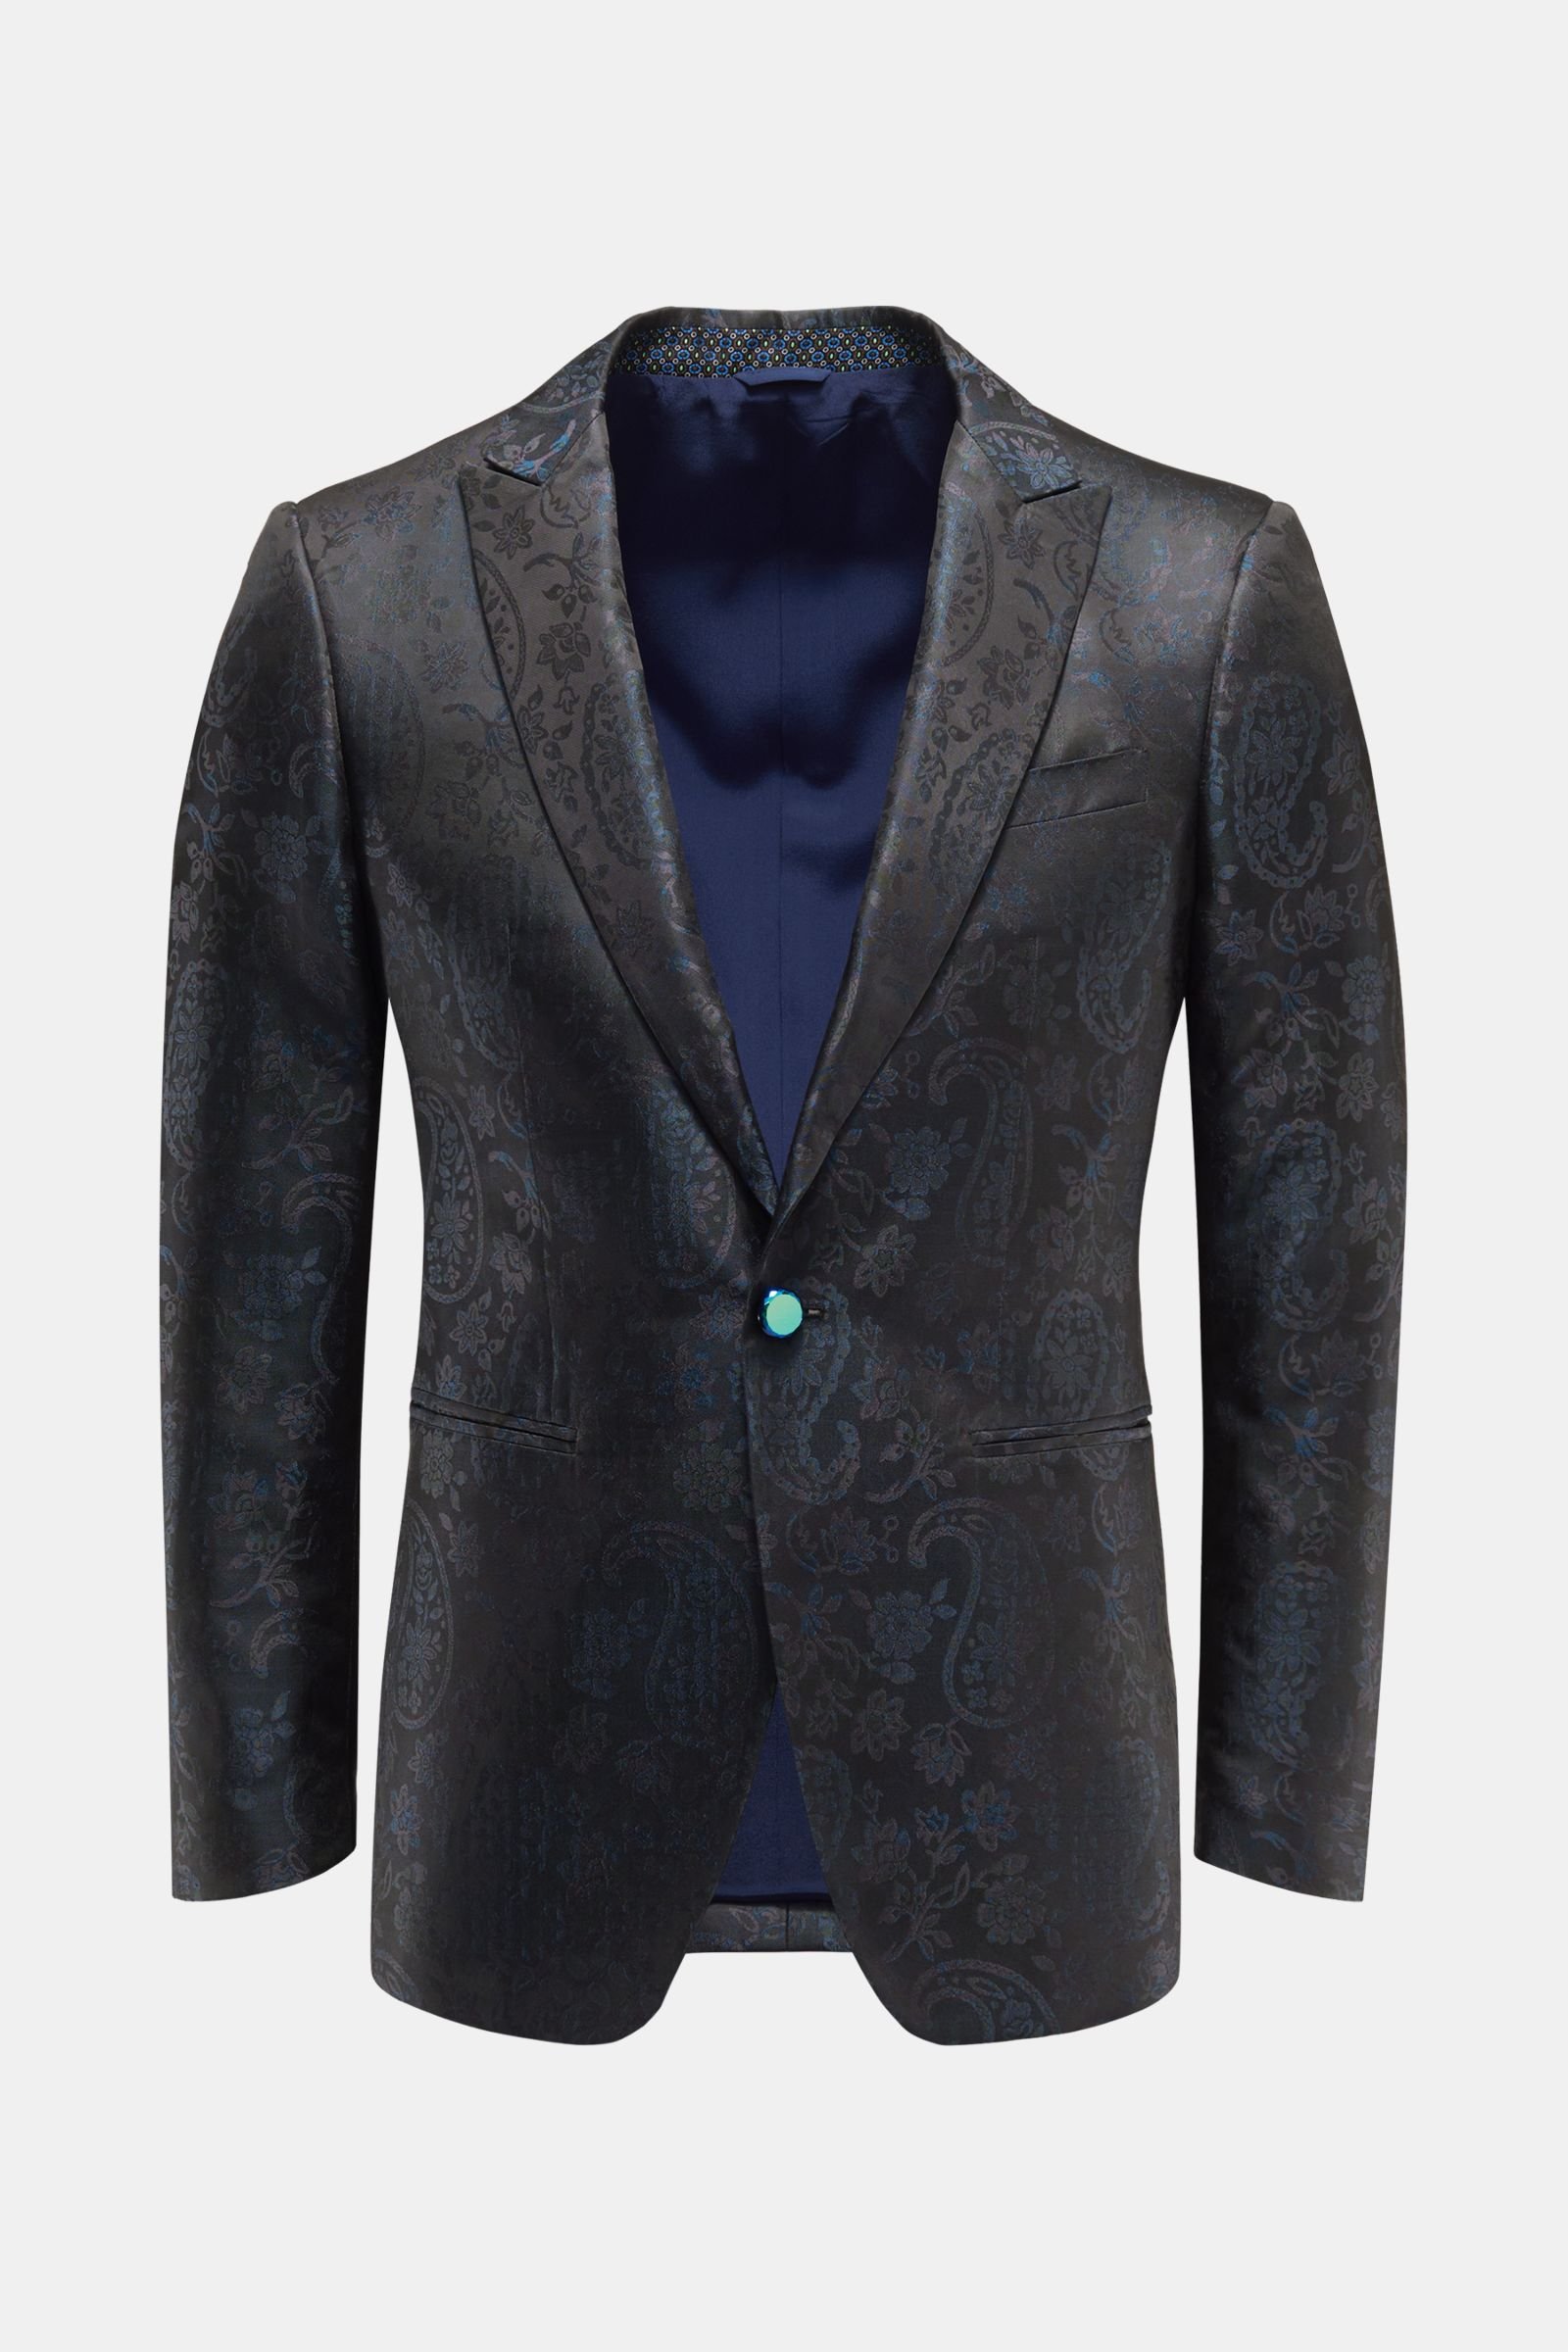 Tuxedo smart-casual jacket anthracite/teal patterned